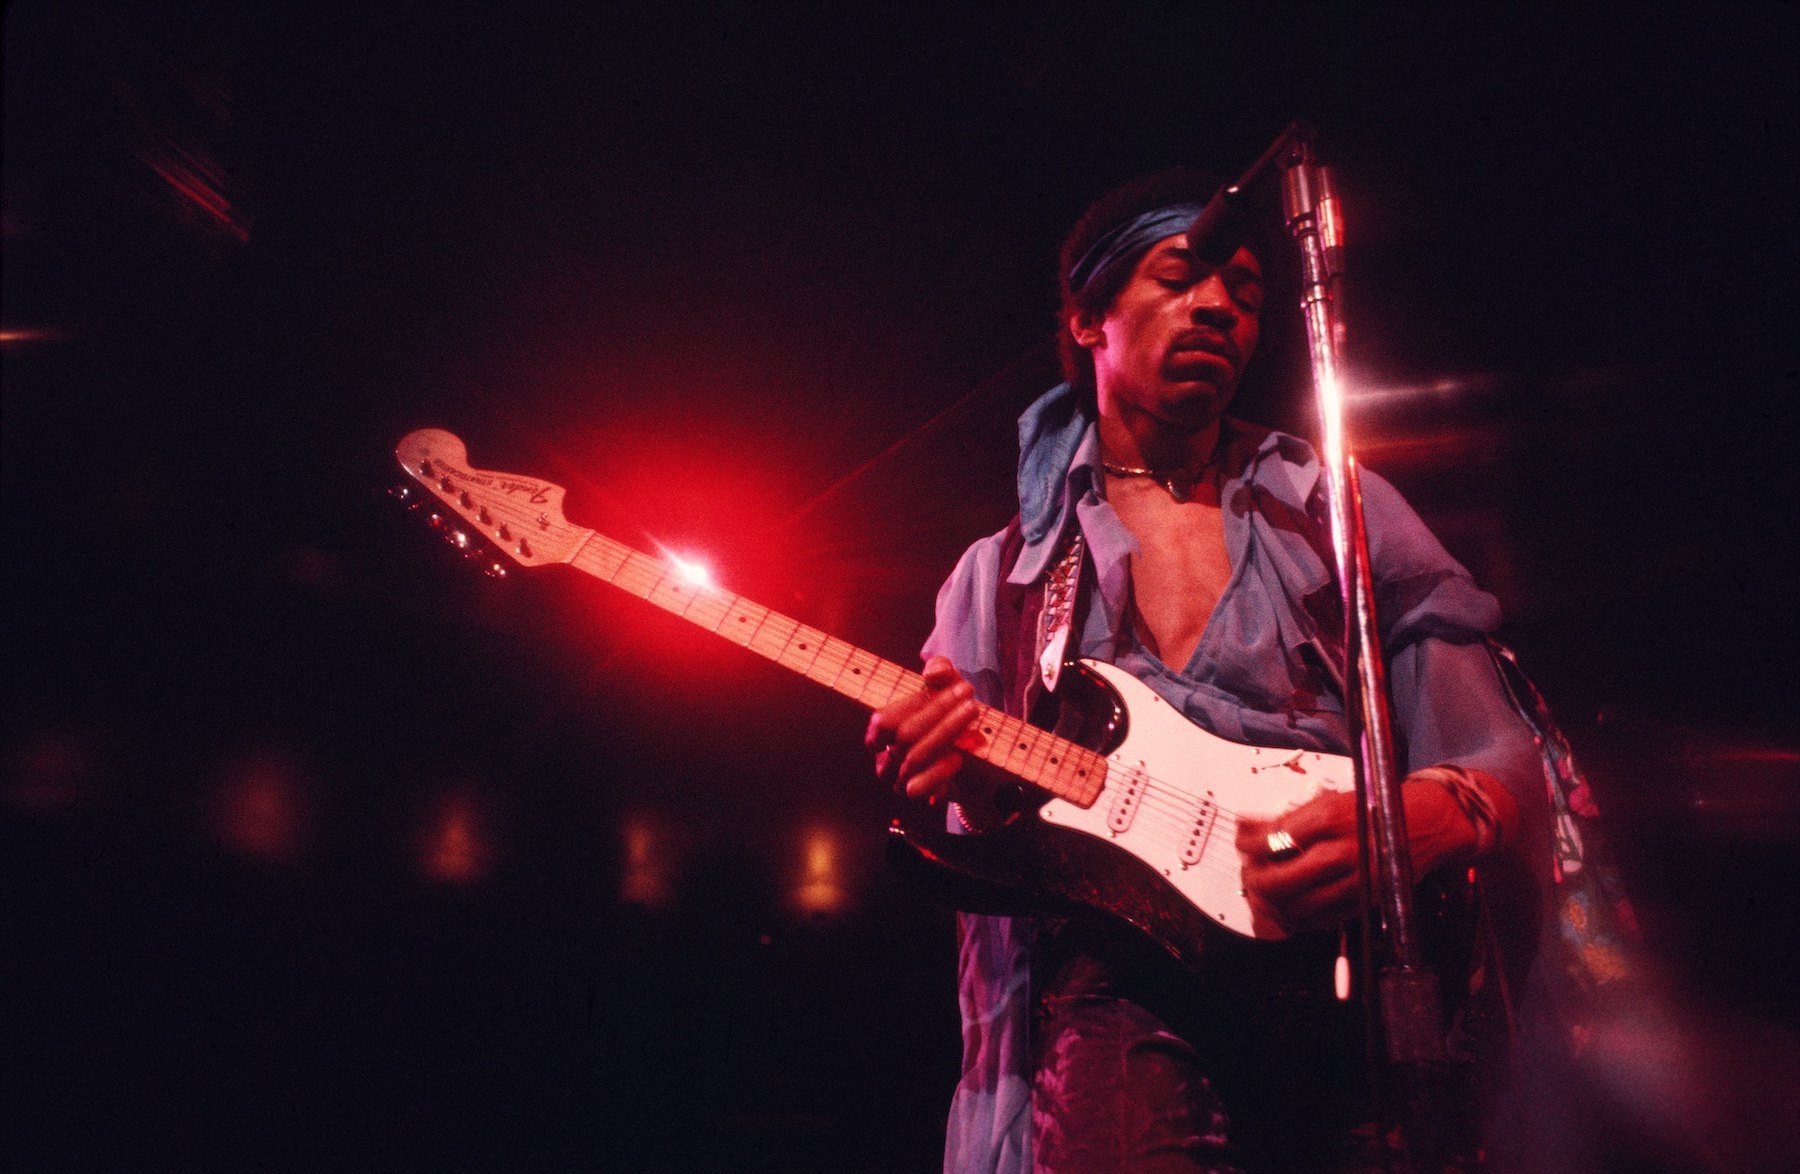 Jimi Hendrix, whose father punished him for using his left hand, playing guitar